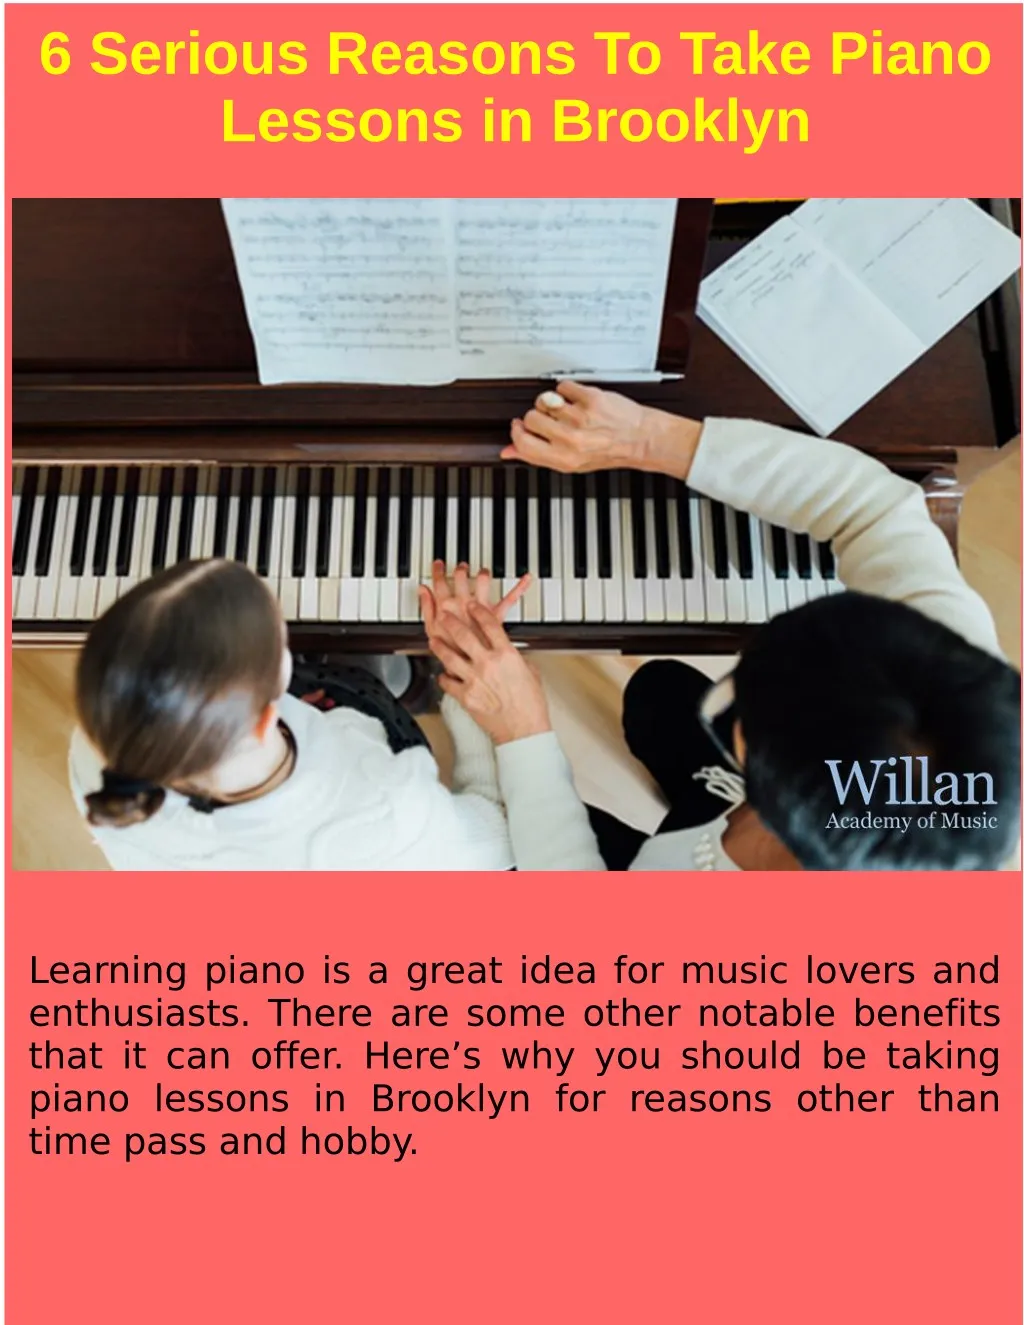 6 serious reasons to take piano lessons